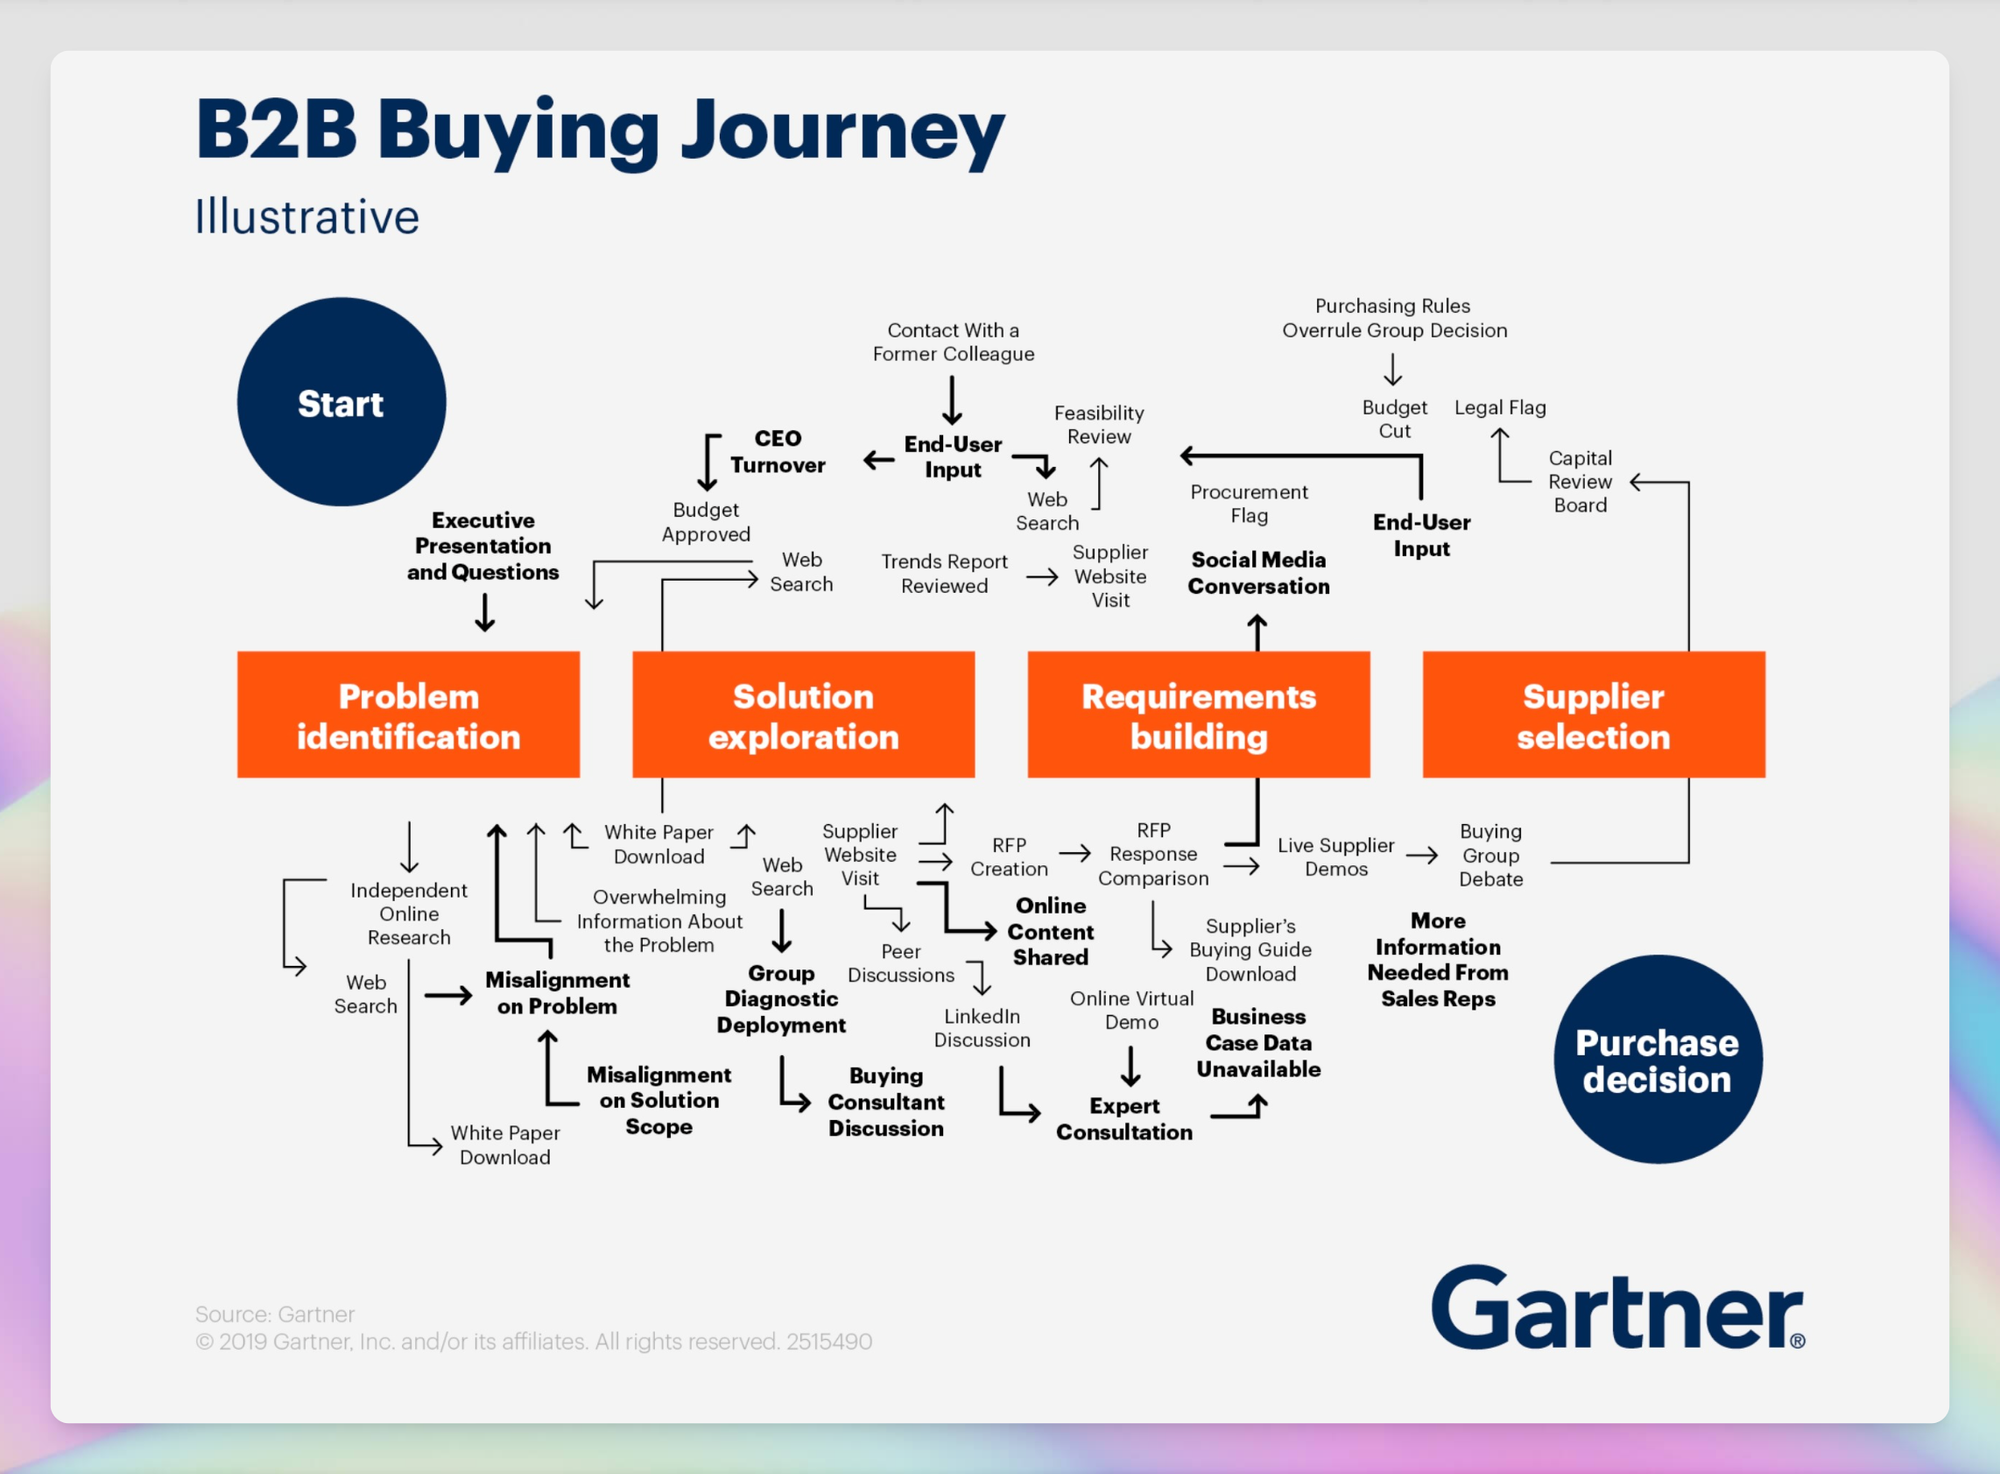 Gartner's data on how info plays a key role in closing deals